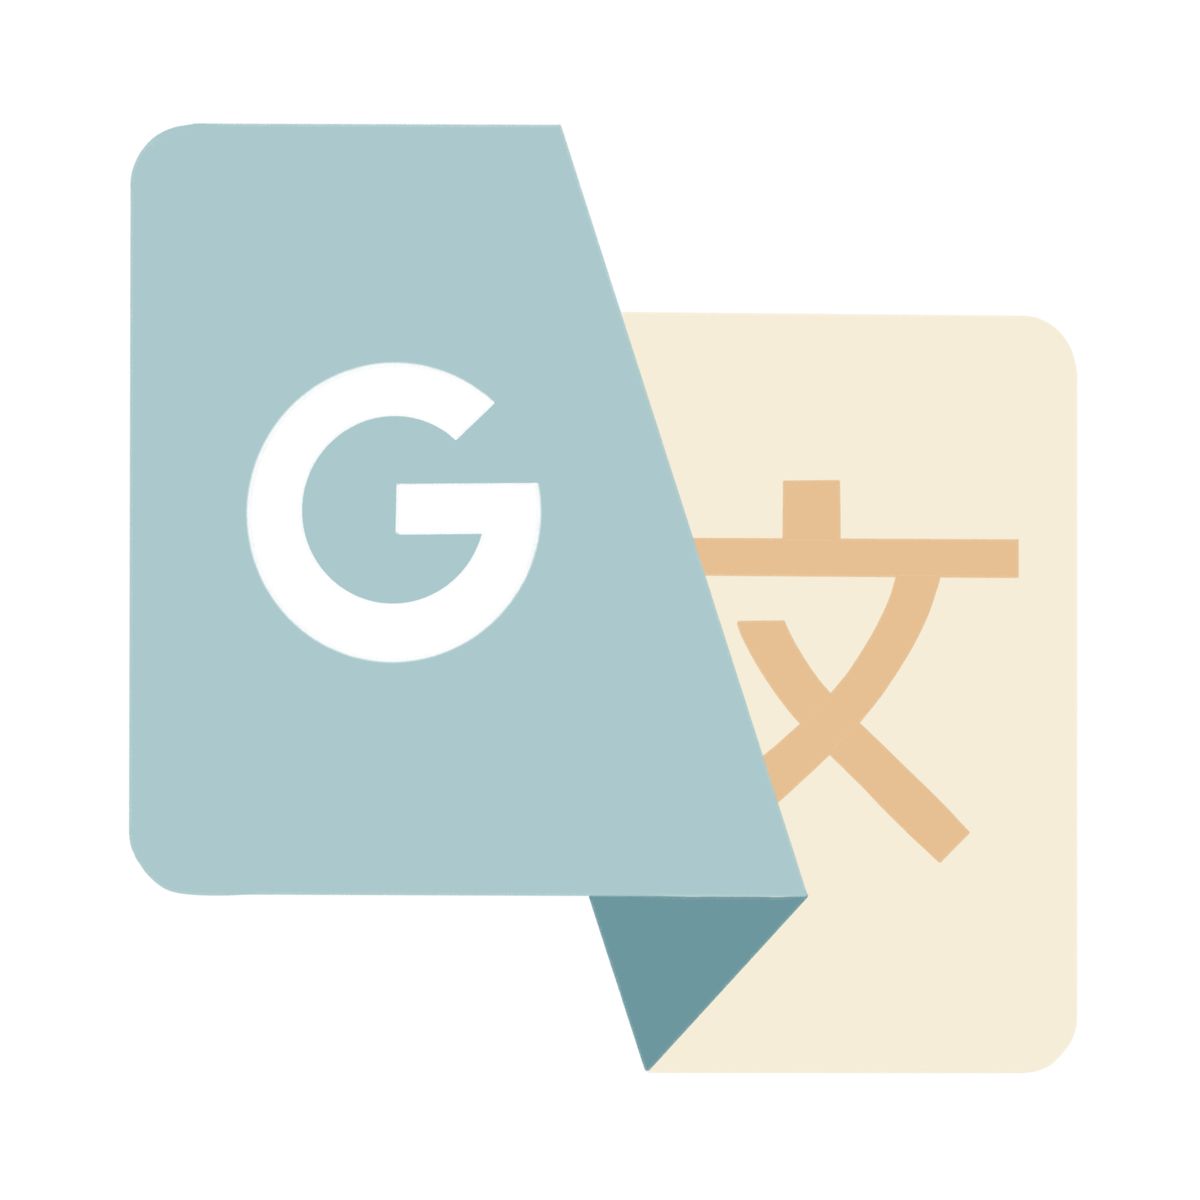 Google translate app cover. App covers, iPhone app design, iPhone apps